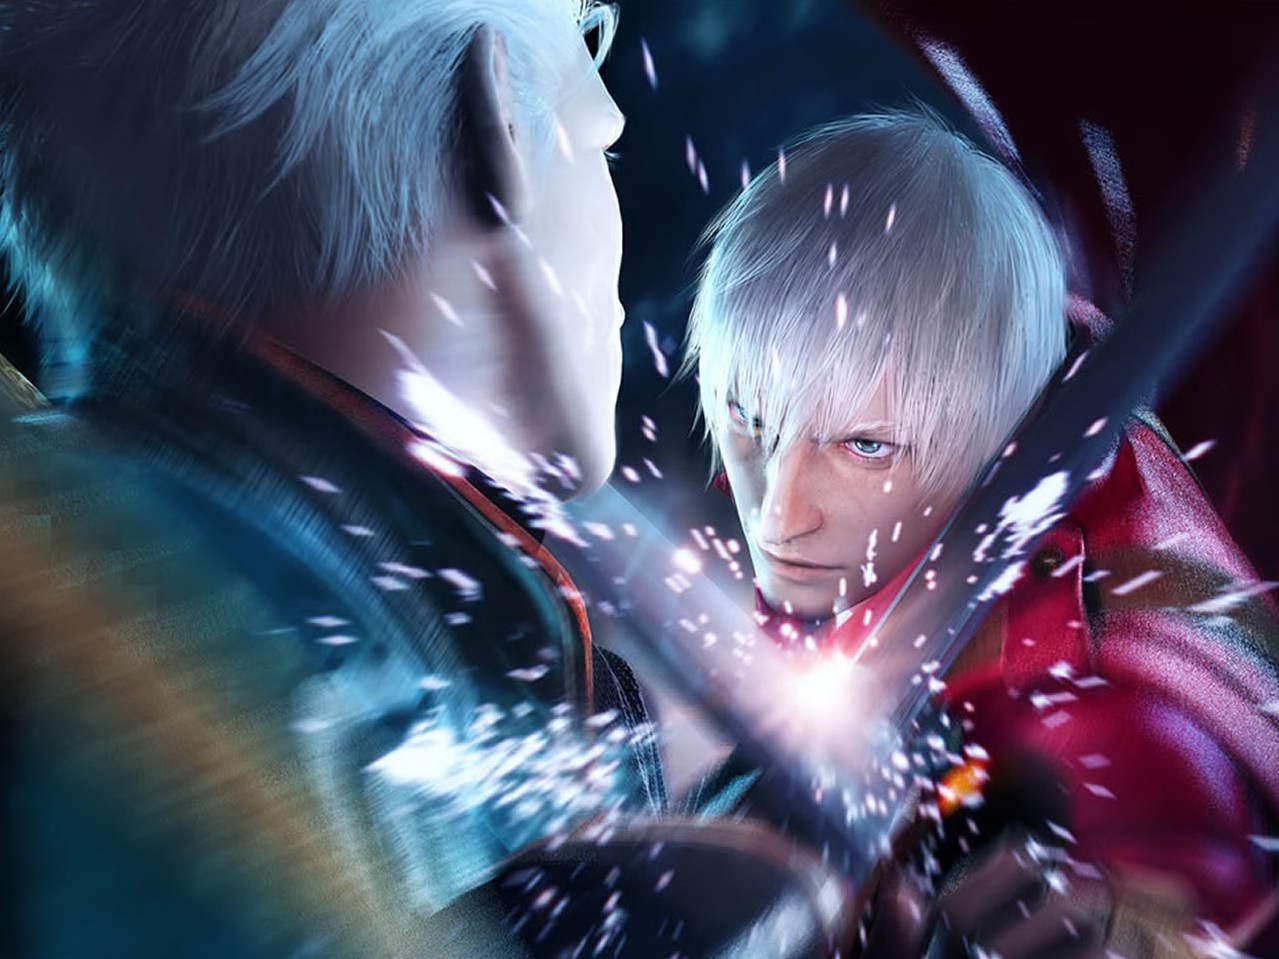 4(devil may cry 4)(ֽ8)